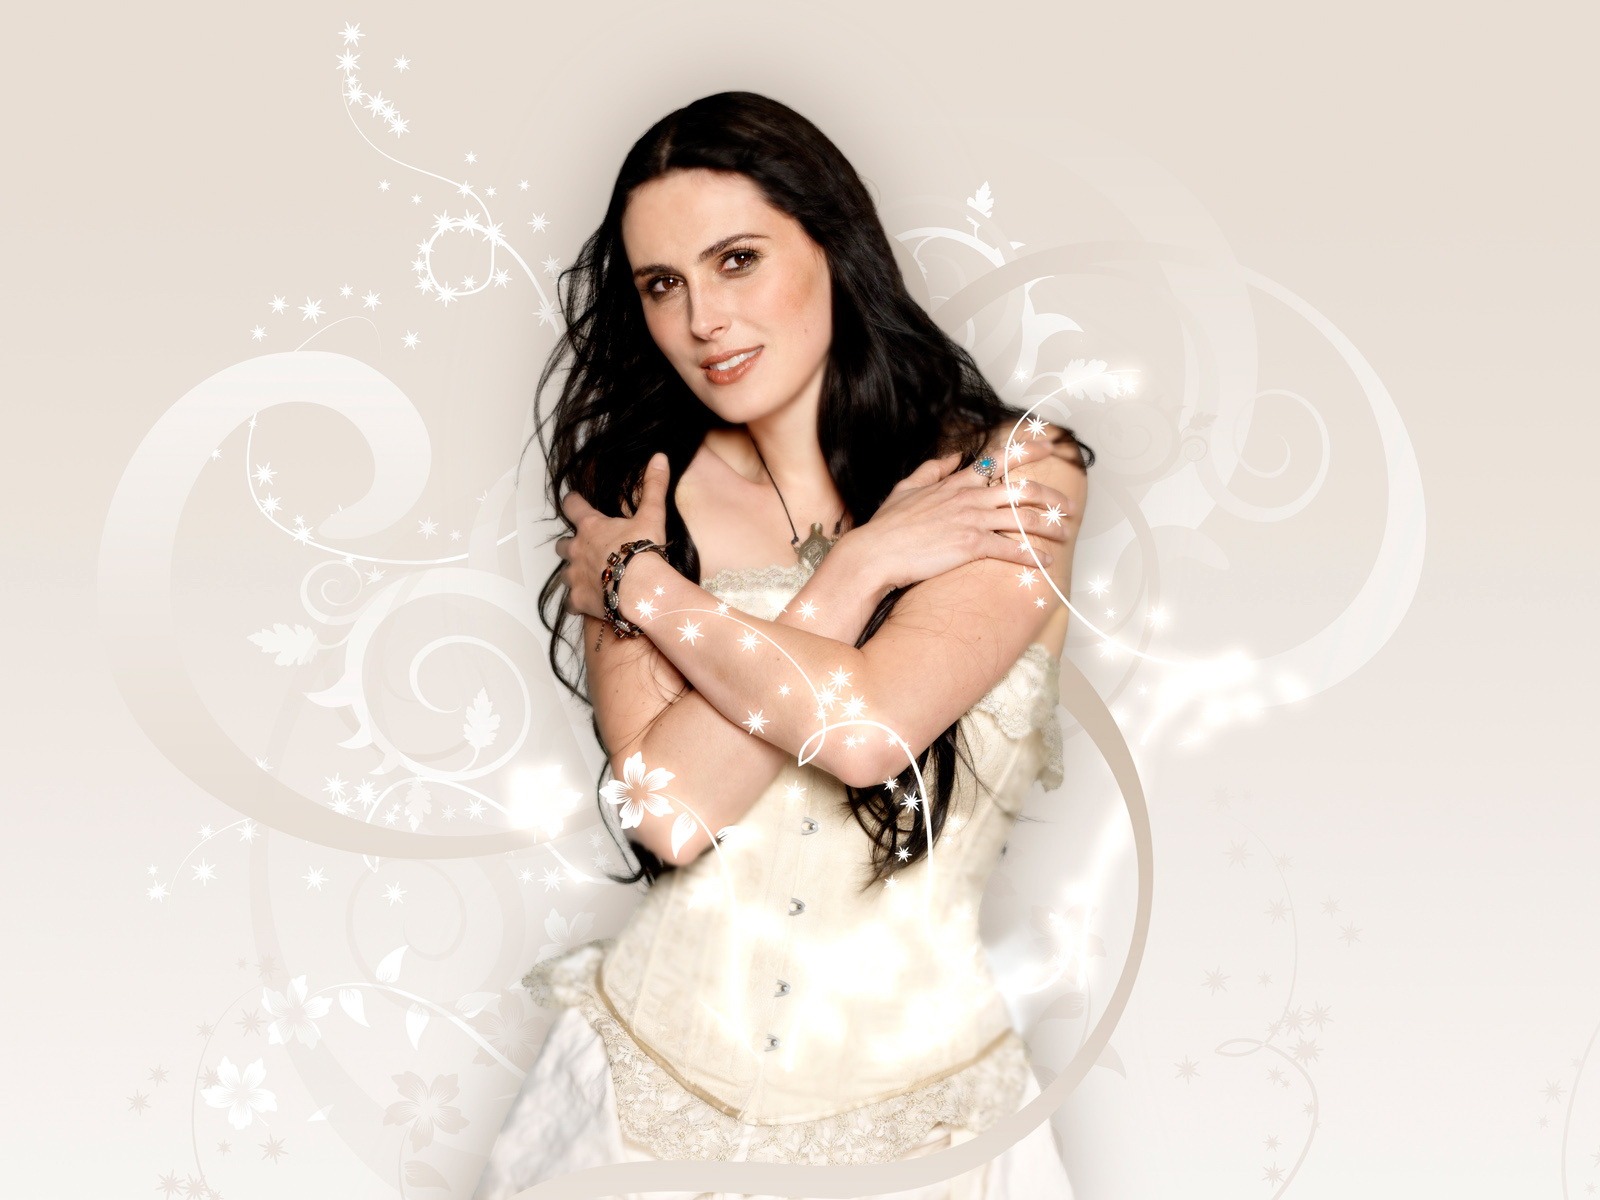 Sharon den Adel #002 - 1600x1200 Wallpapers Pictures Photos Images